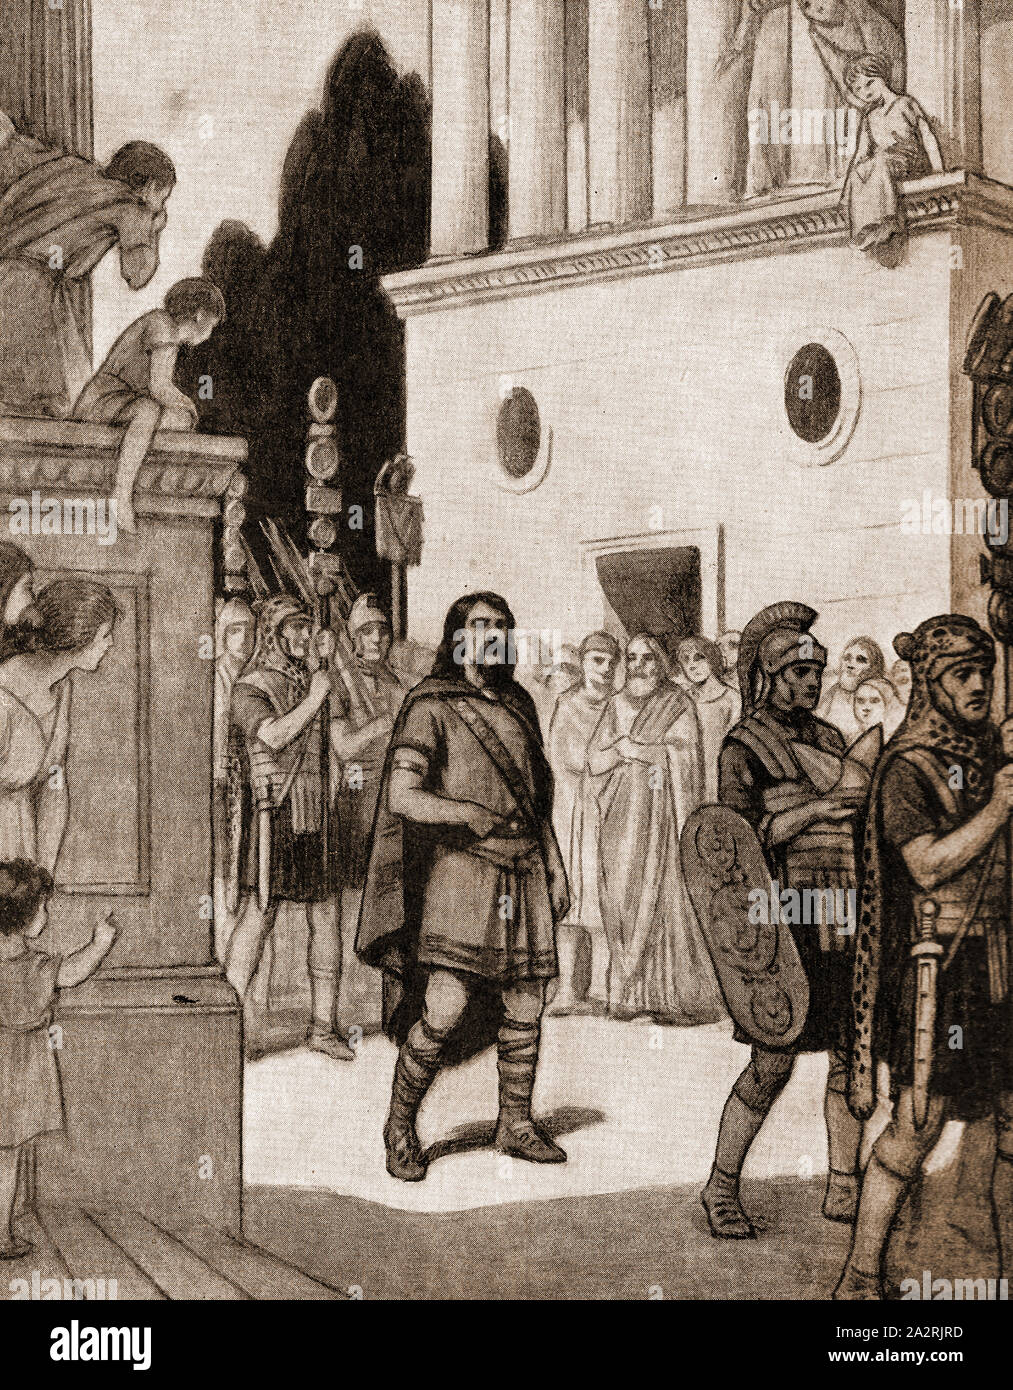 1930's illustration . The British warrior chief  Caratacus of the  Catuvellauni tribe (1st century Britain) after being captured by the Romans Stock Photo